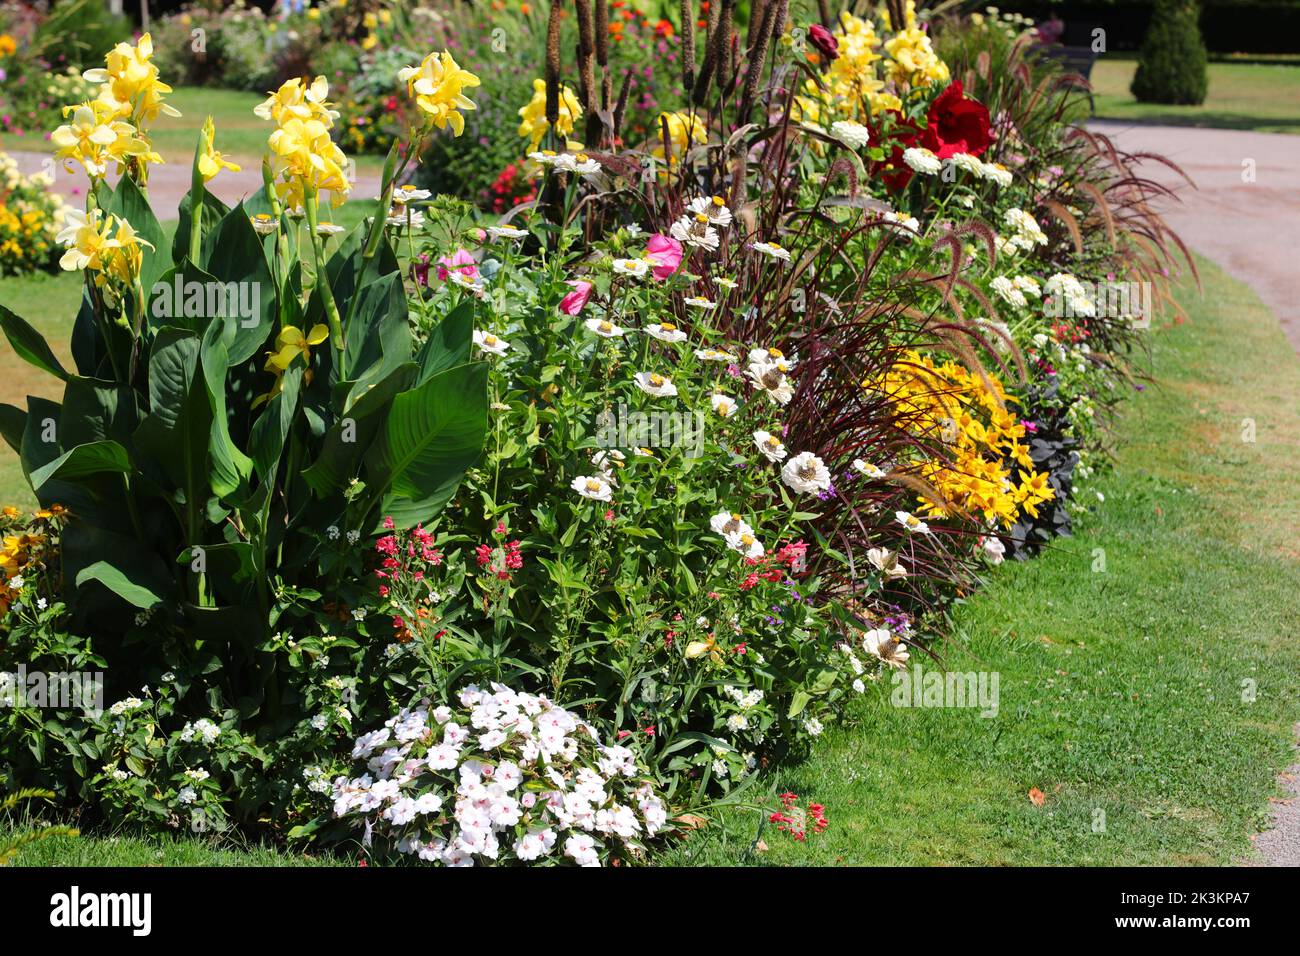 flowerbed with many varieties of fragrant flowers in spring without people Stock Photo